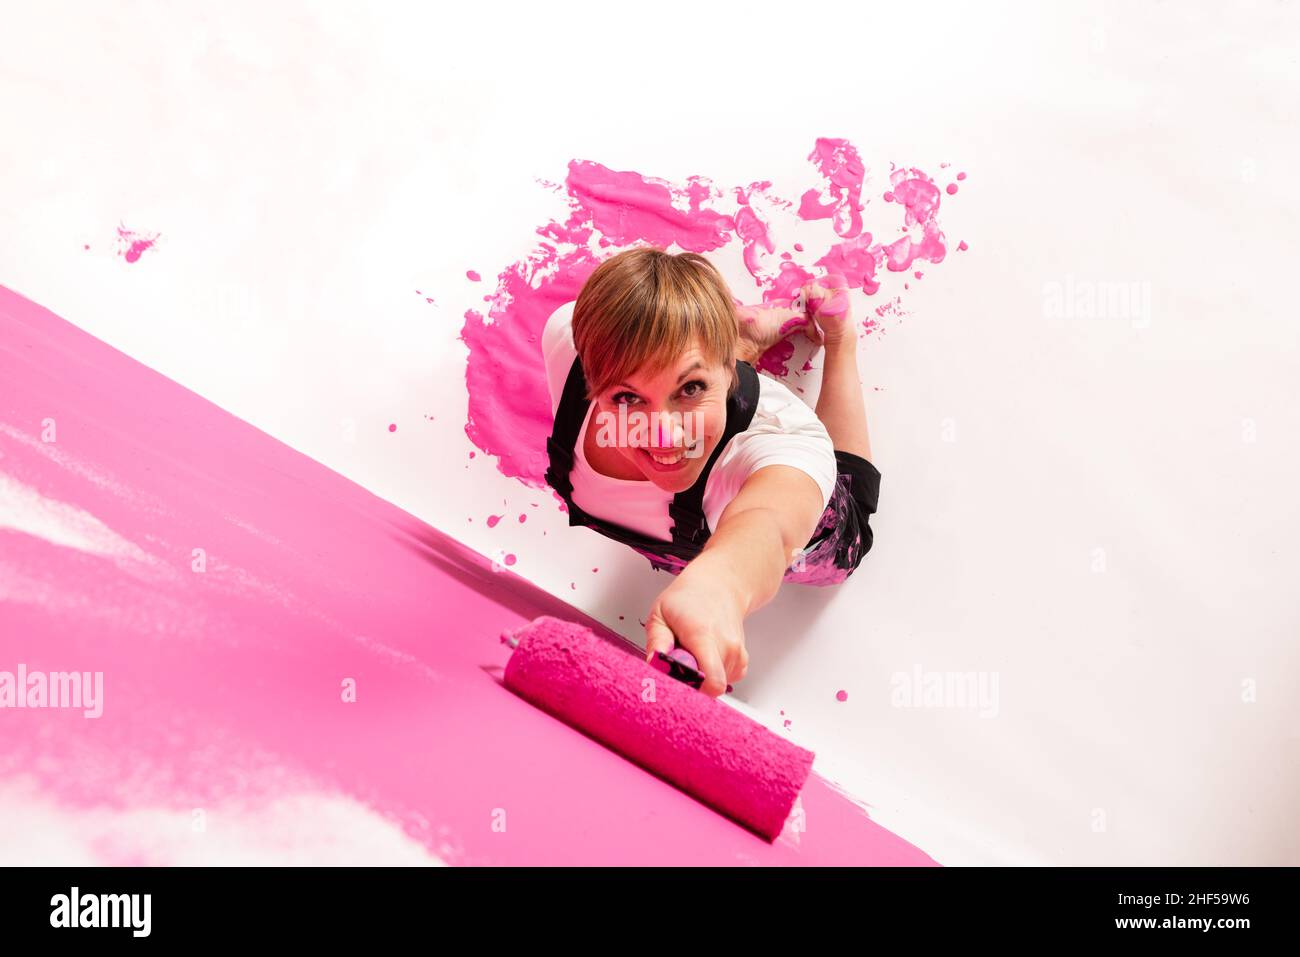 Young woman painting a wall with pink colored roller. She is seen from above and she is looking to the camera with a friendly smile. Stock Photo